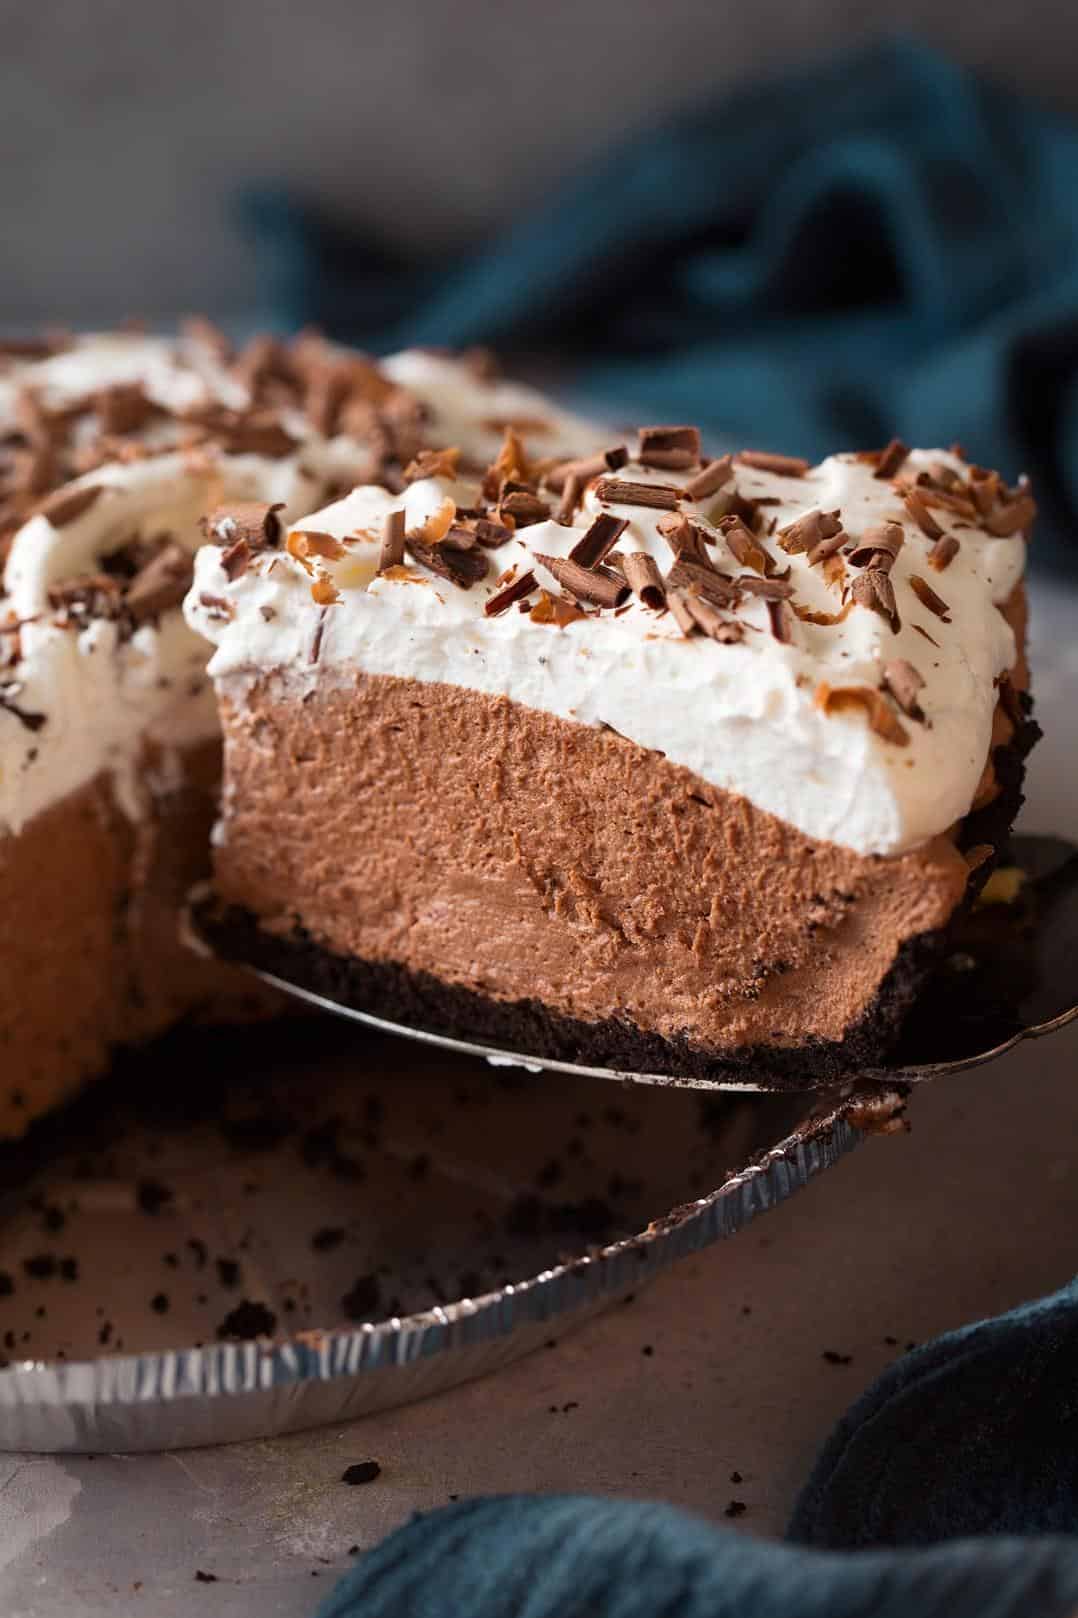  Chocolate lovers, this pie is calling your name!